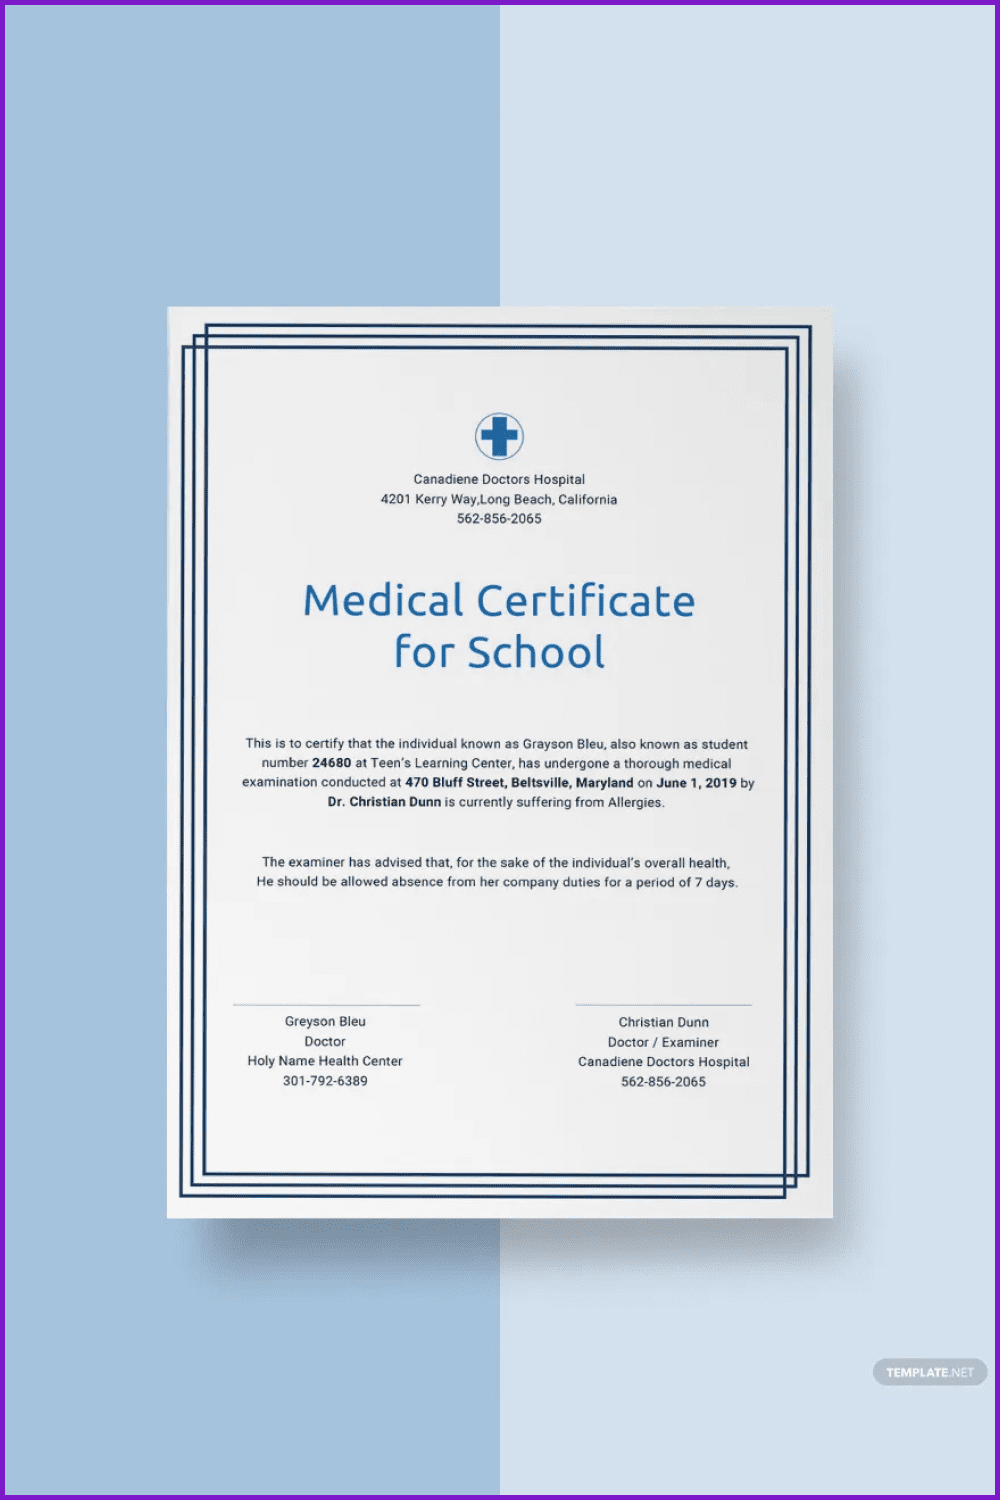 Medical Certificate for School Template.